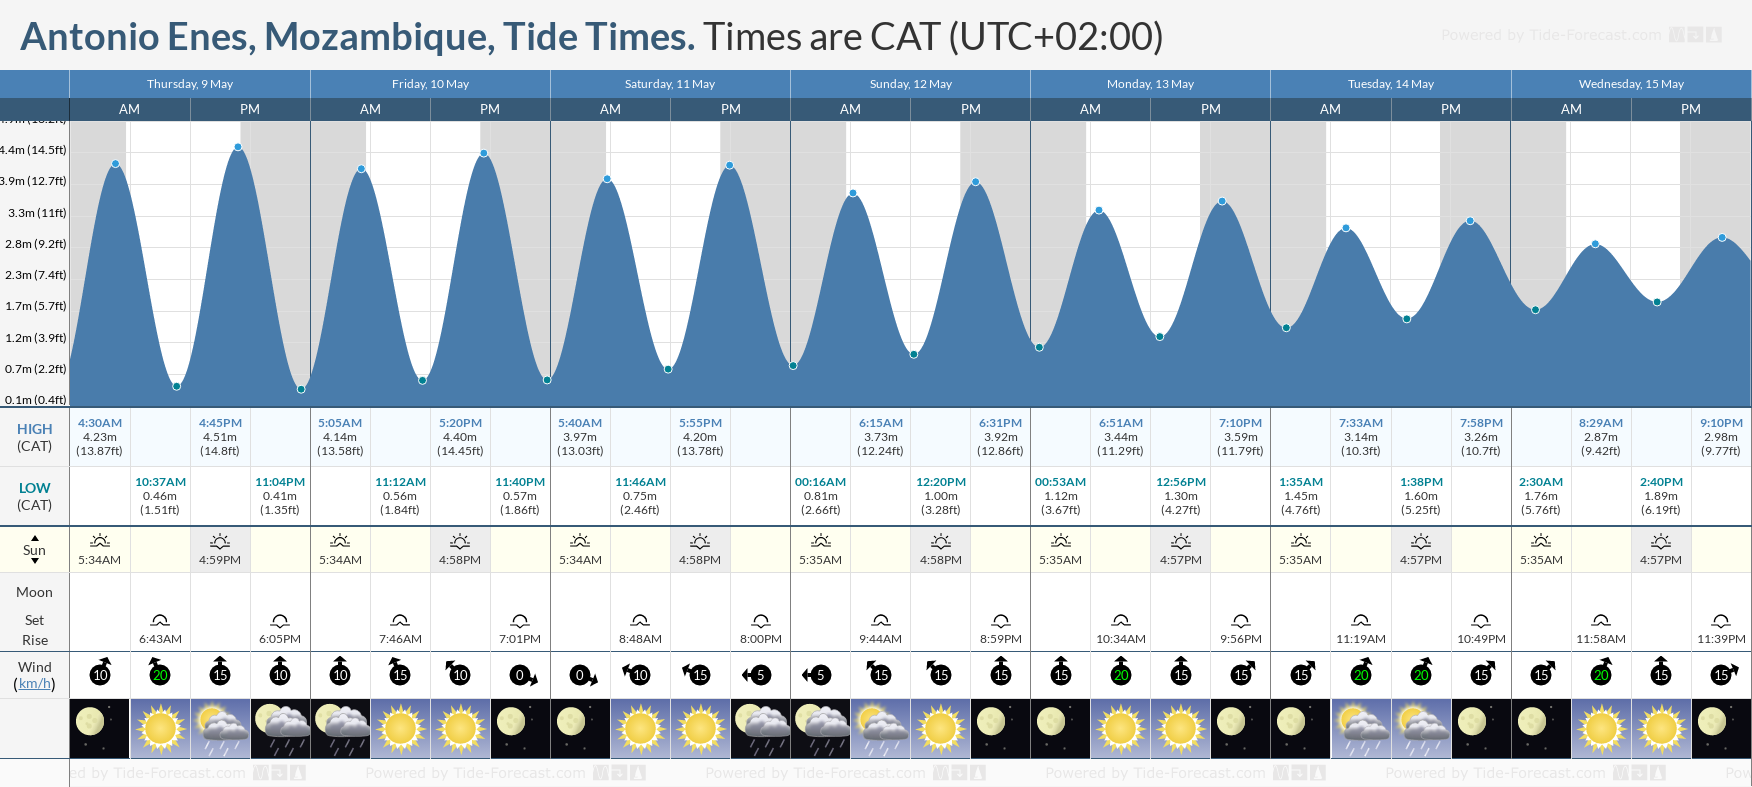 Antonio Enes, Mozambique Tide Chart including high and low tide tide times for the next 7 days